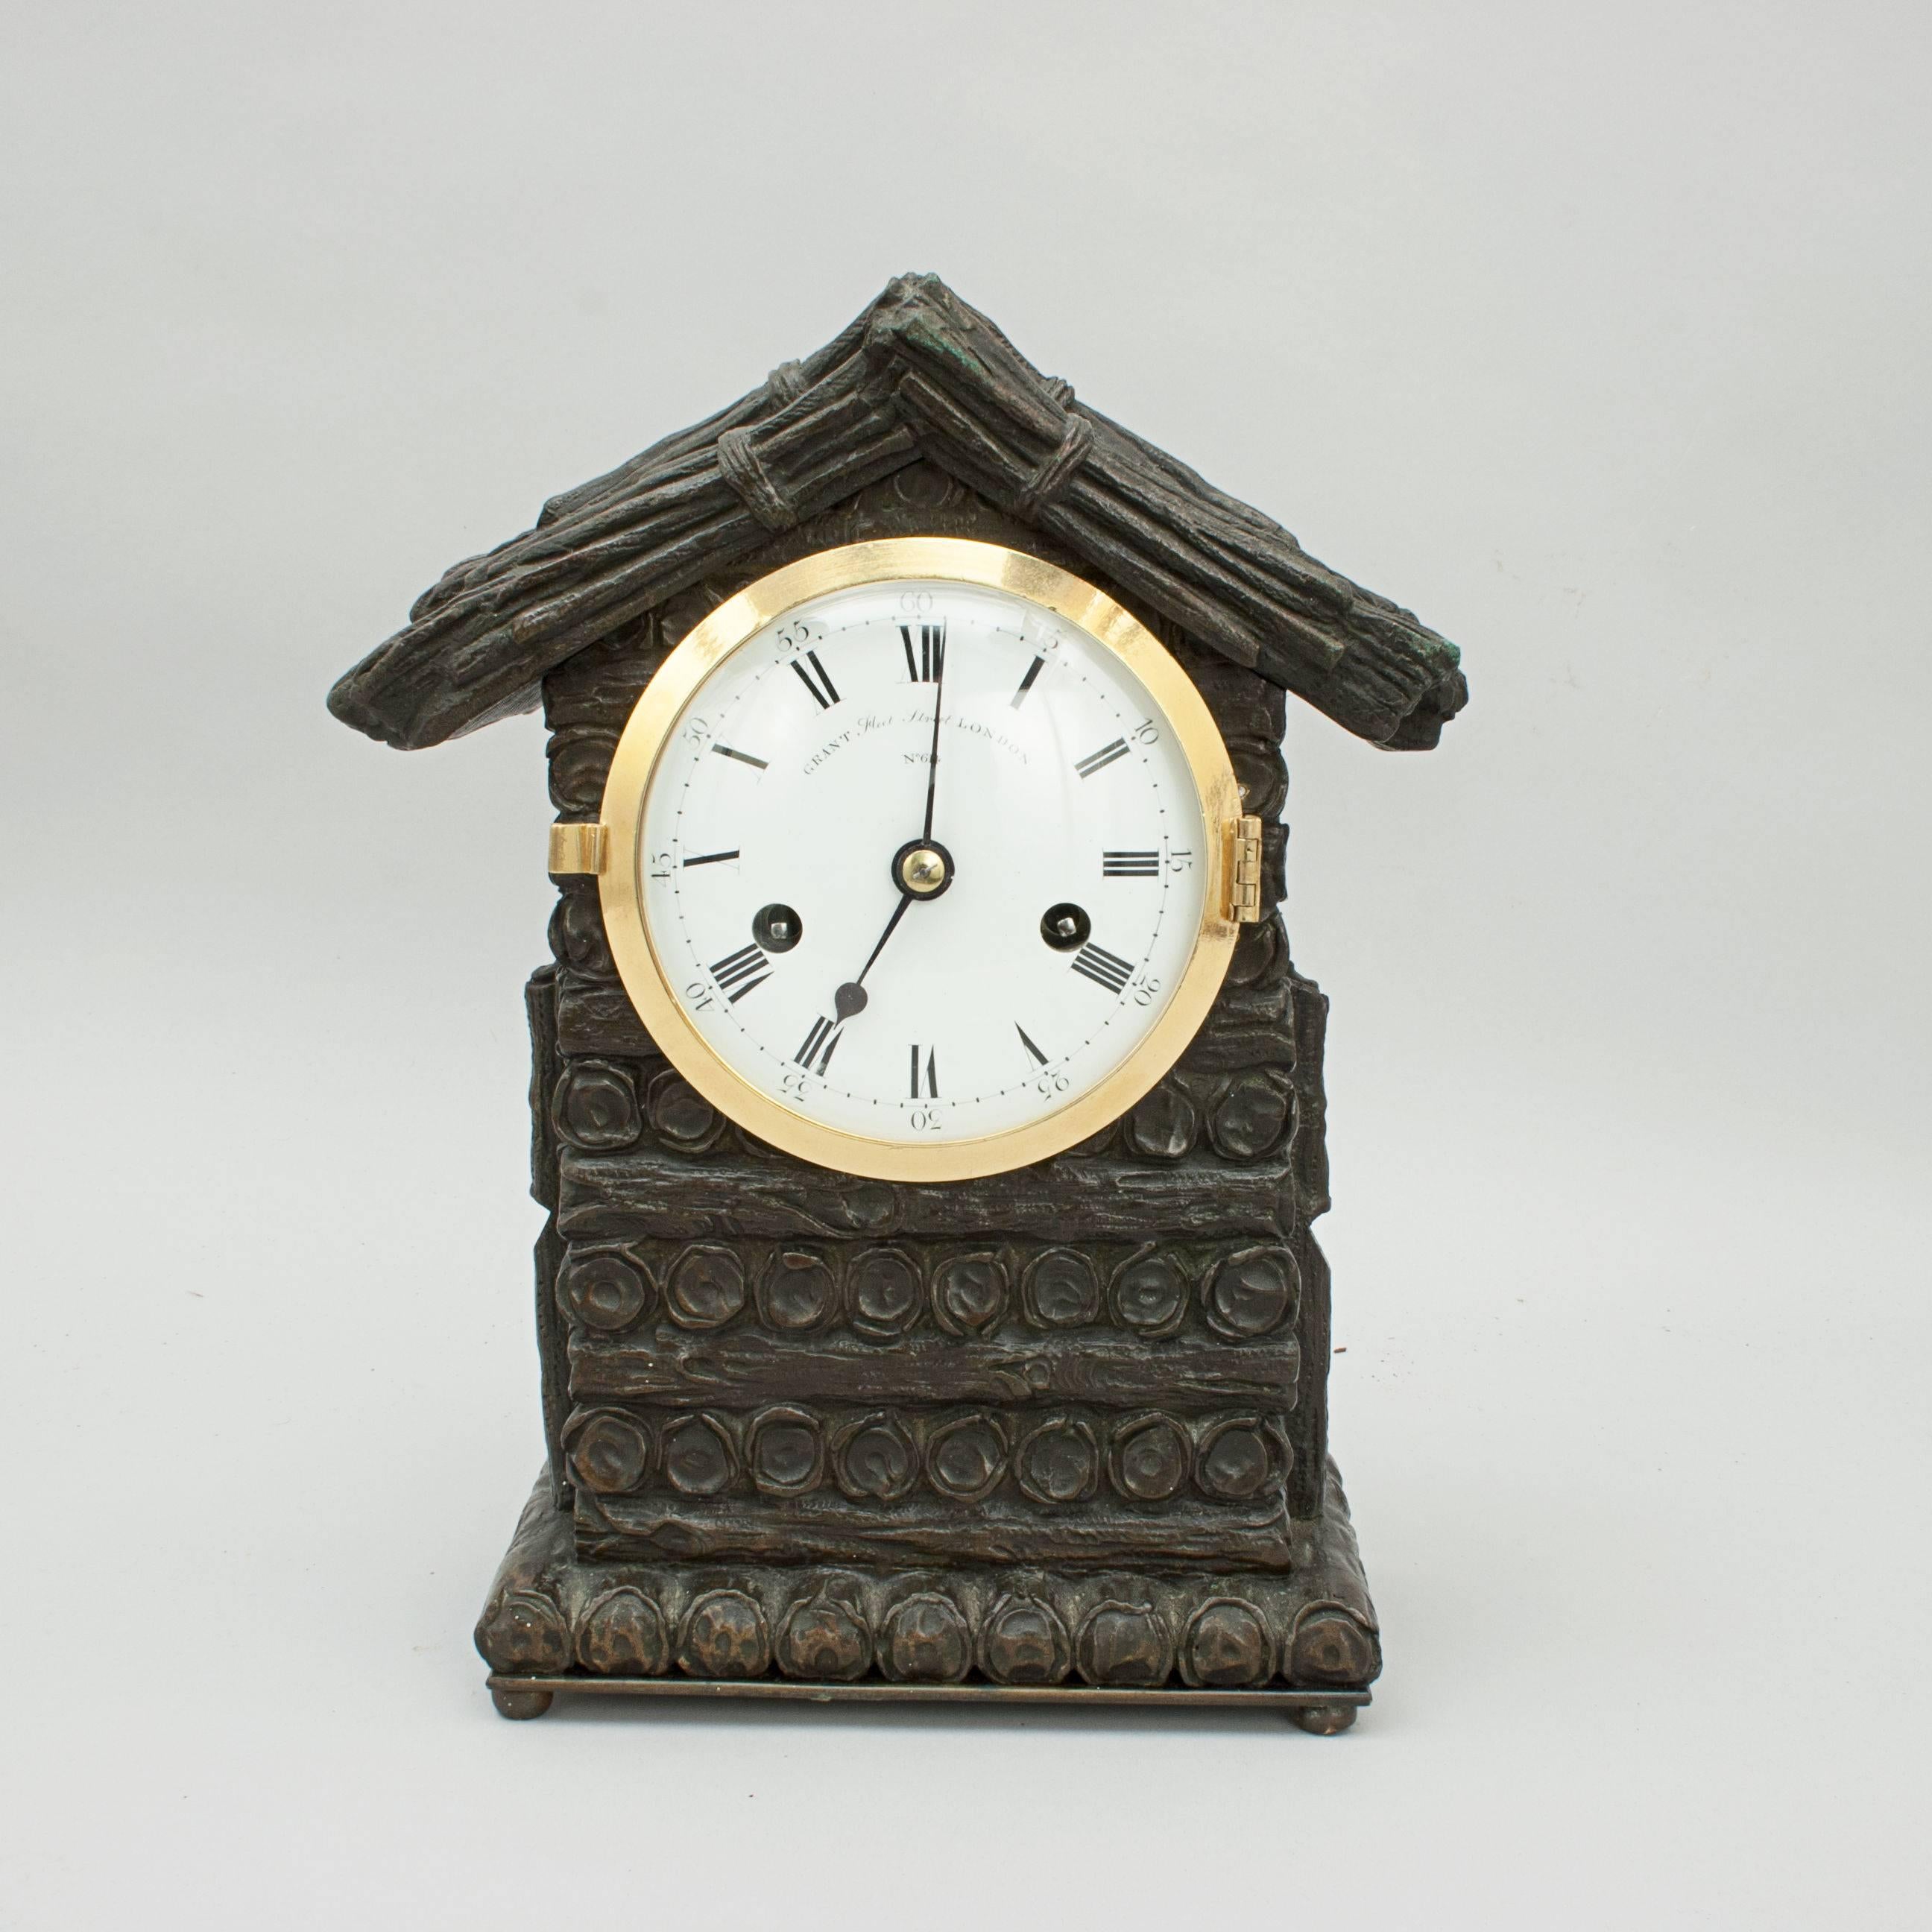 Antique Mantel Clock by Grant, Black Forest Type Design In Good Condition For Sale In Oxfordshire, GB